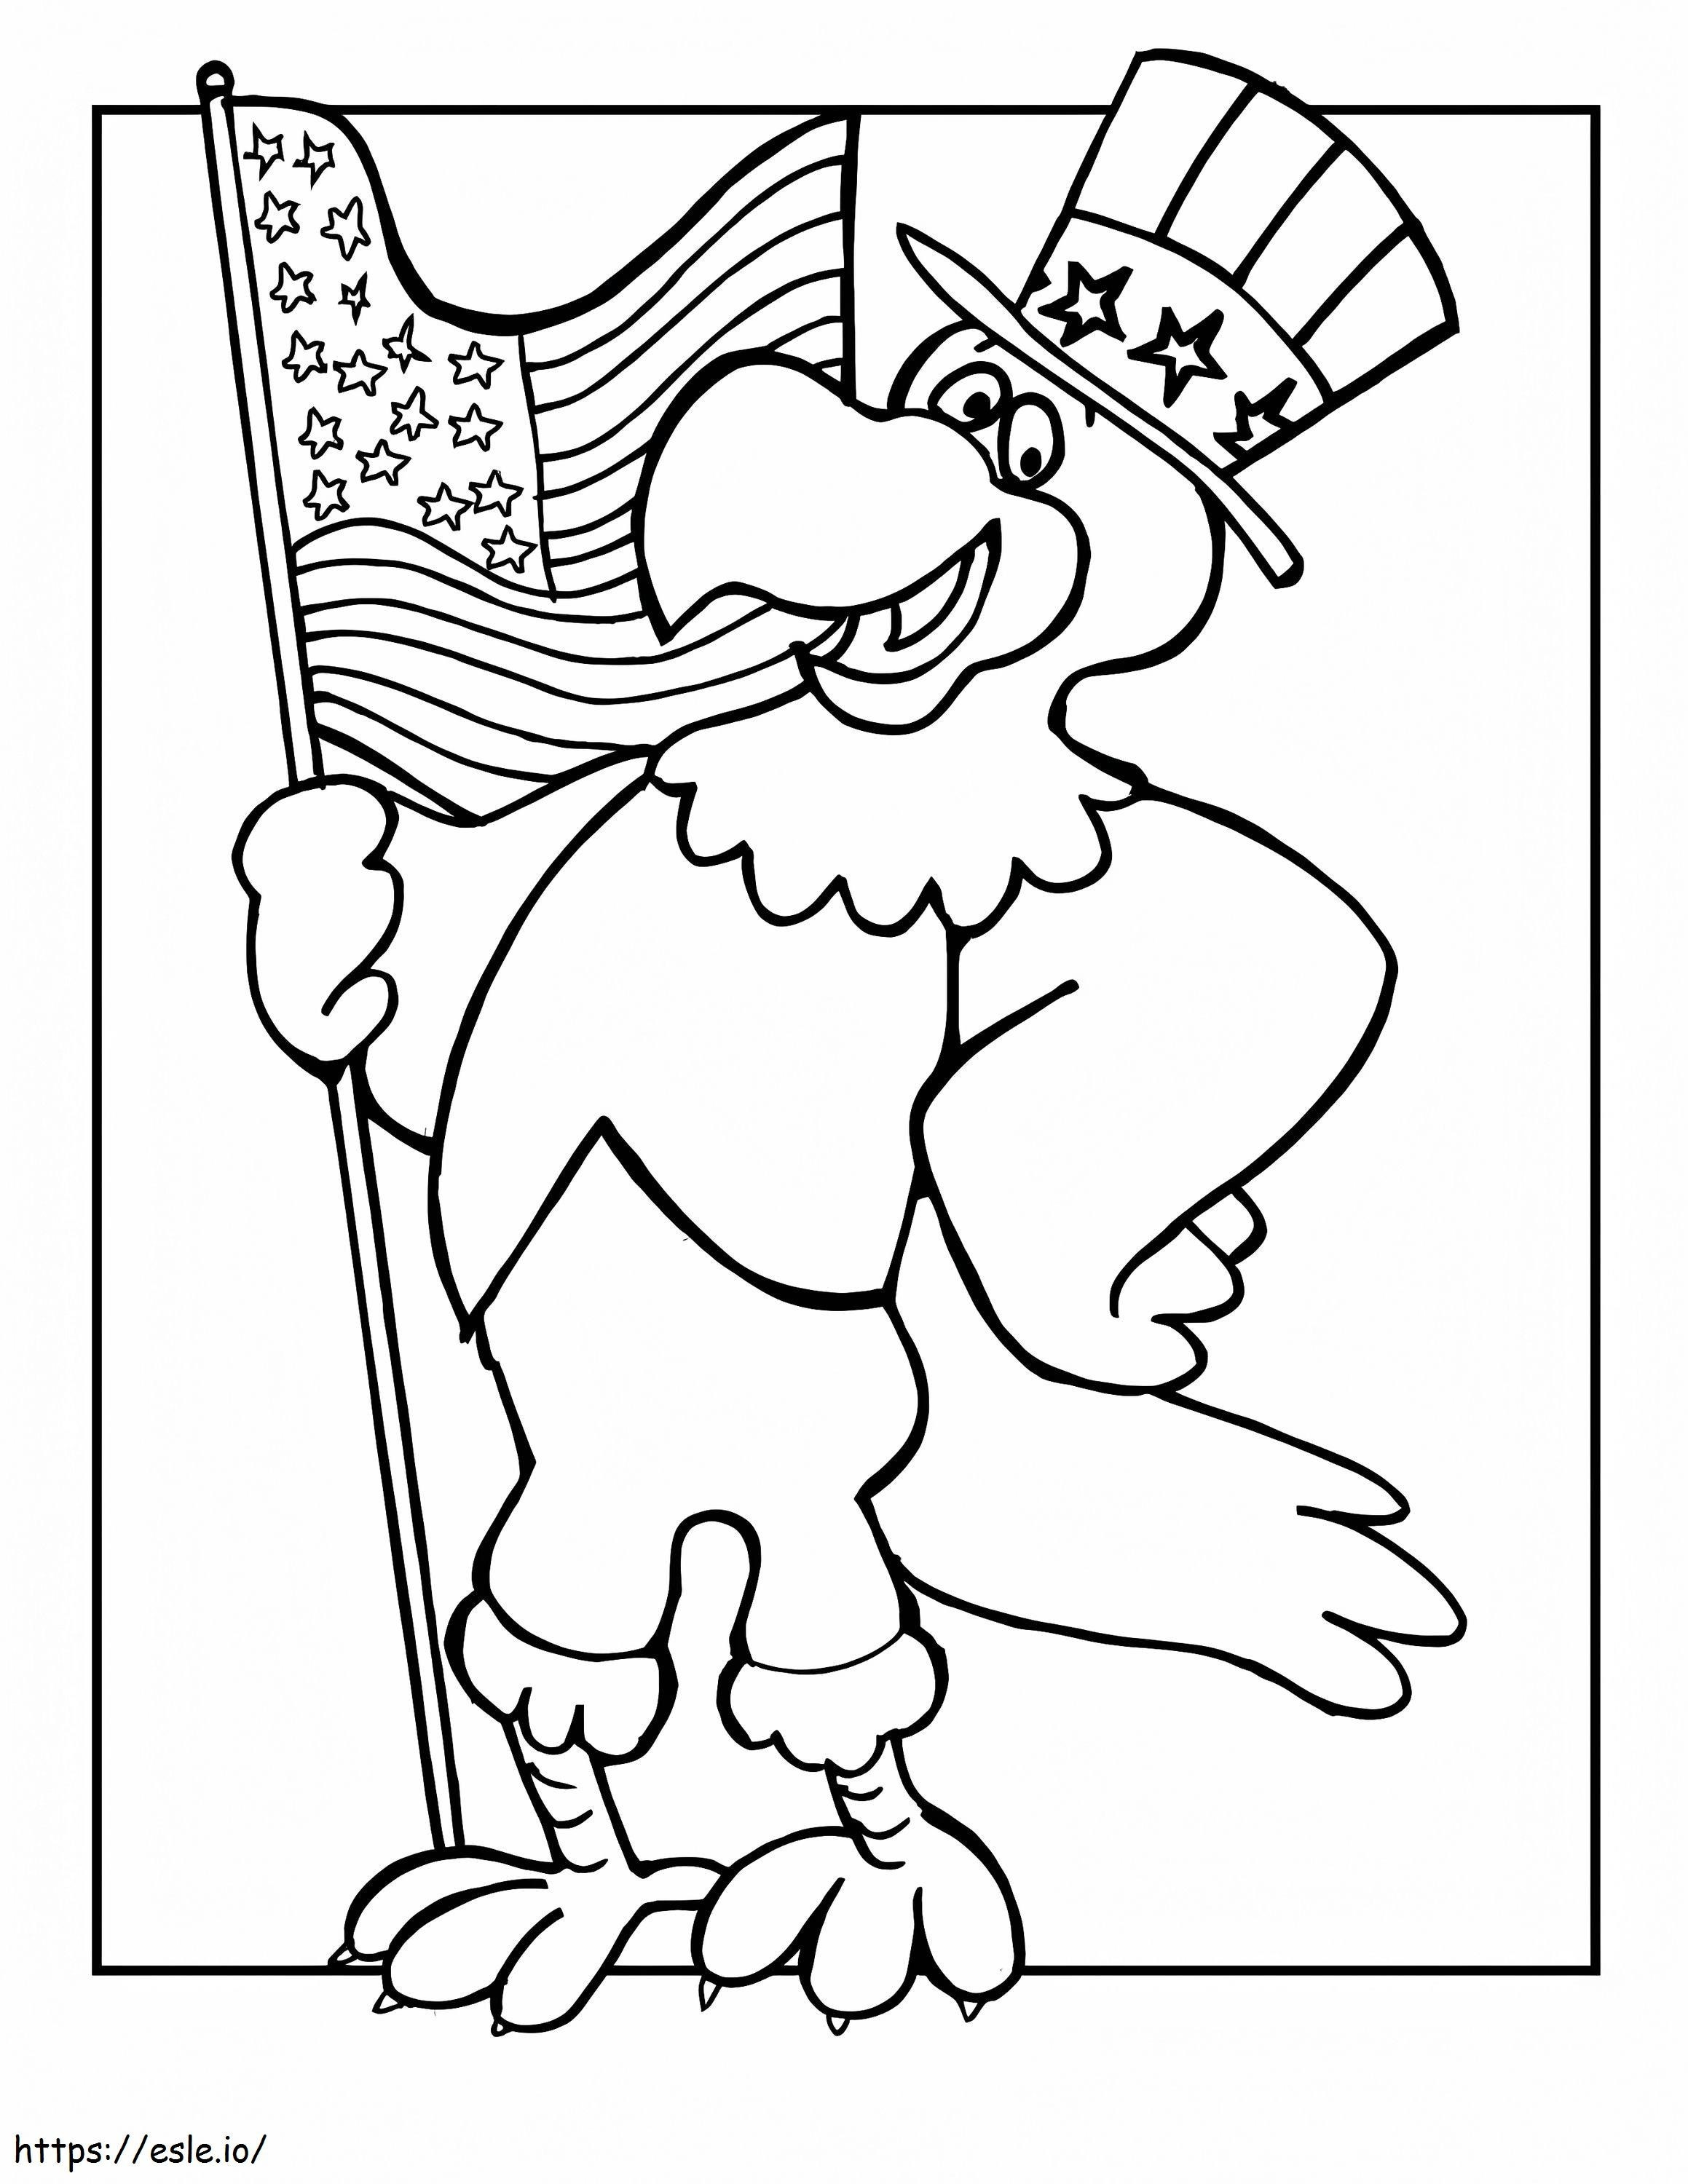 Happy Veterans Day 4 coloring page